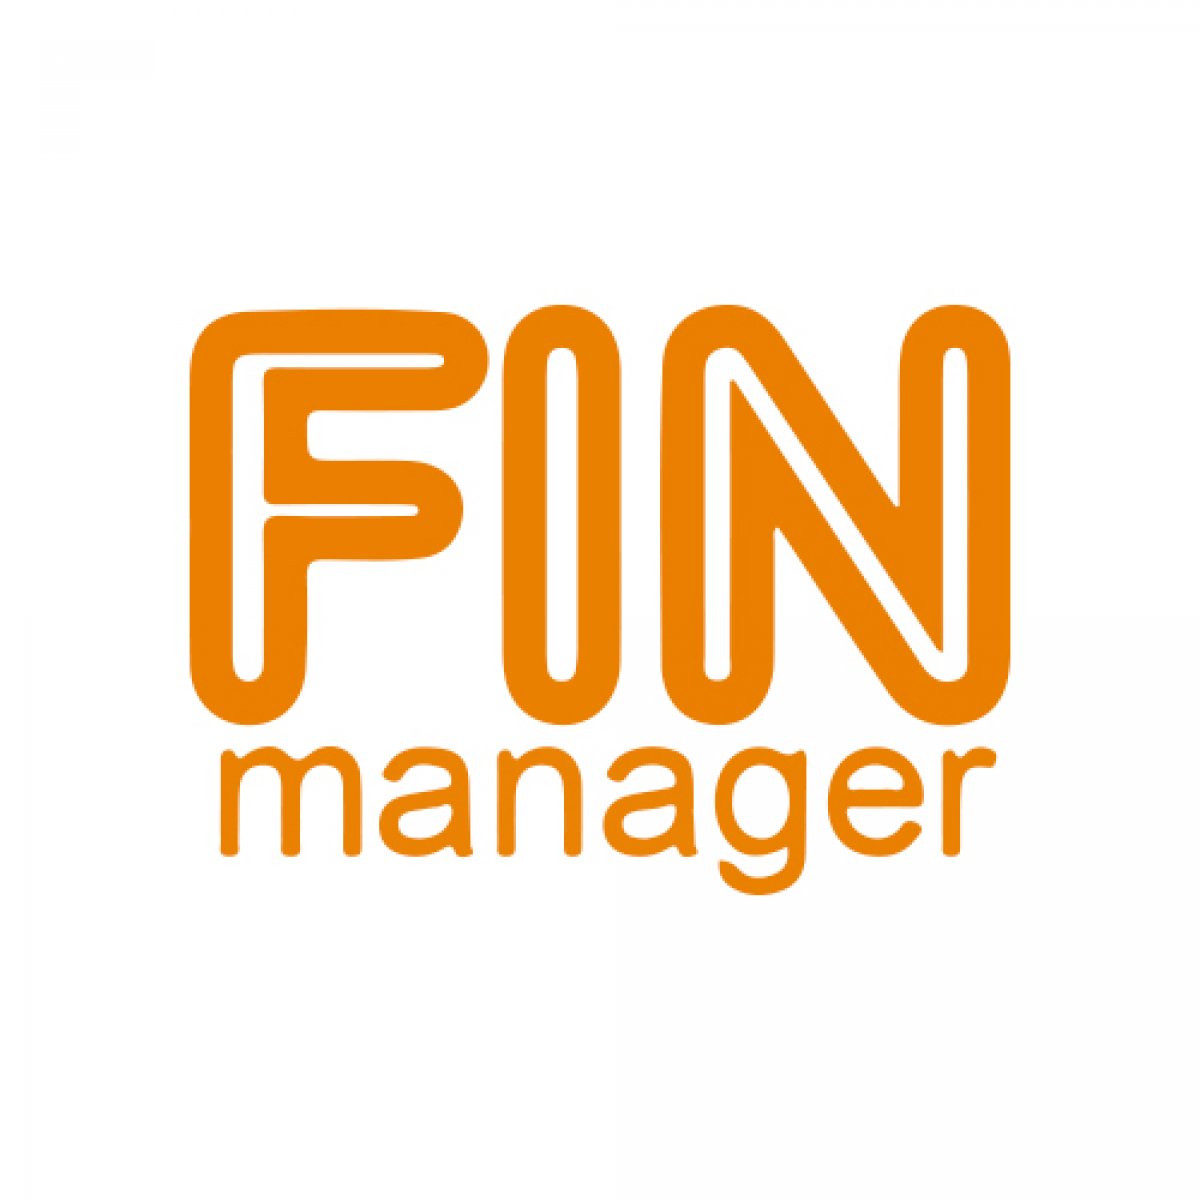 Fin Manager